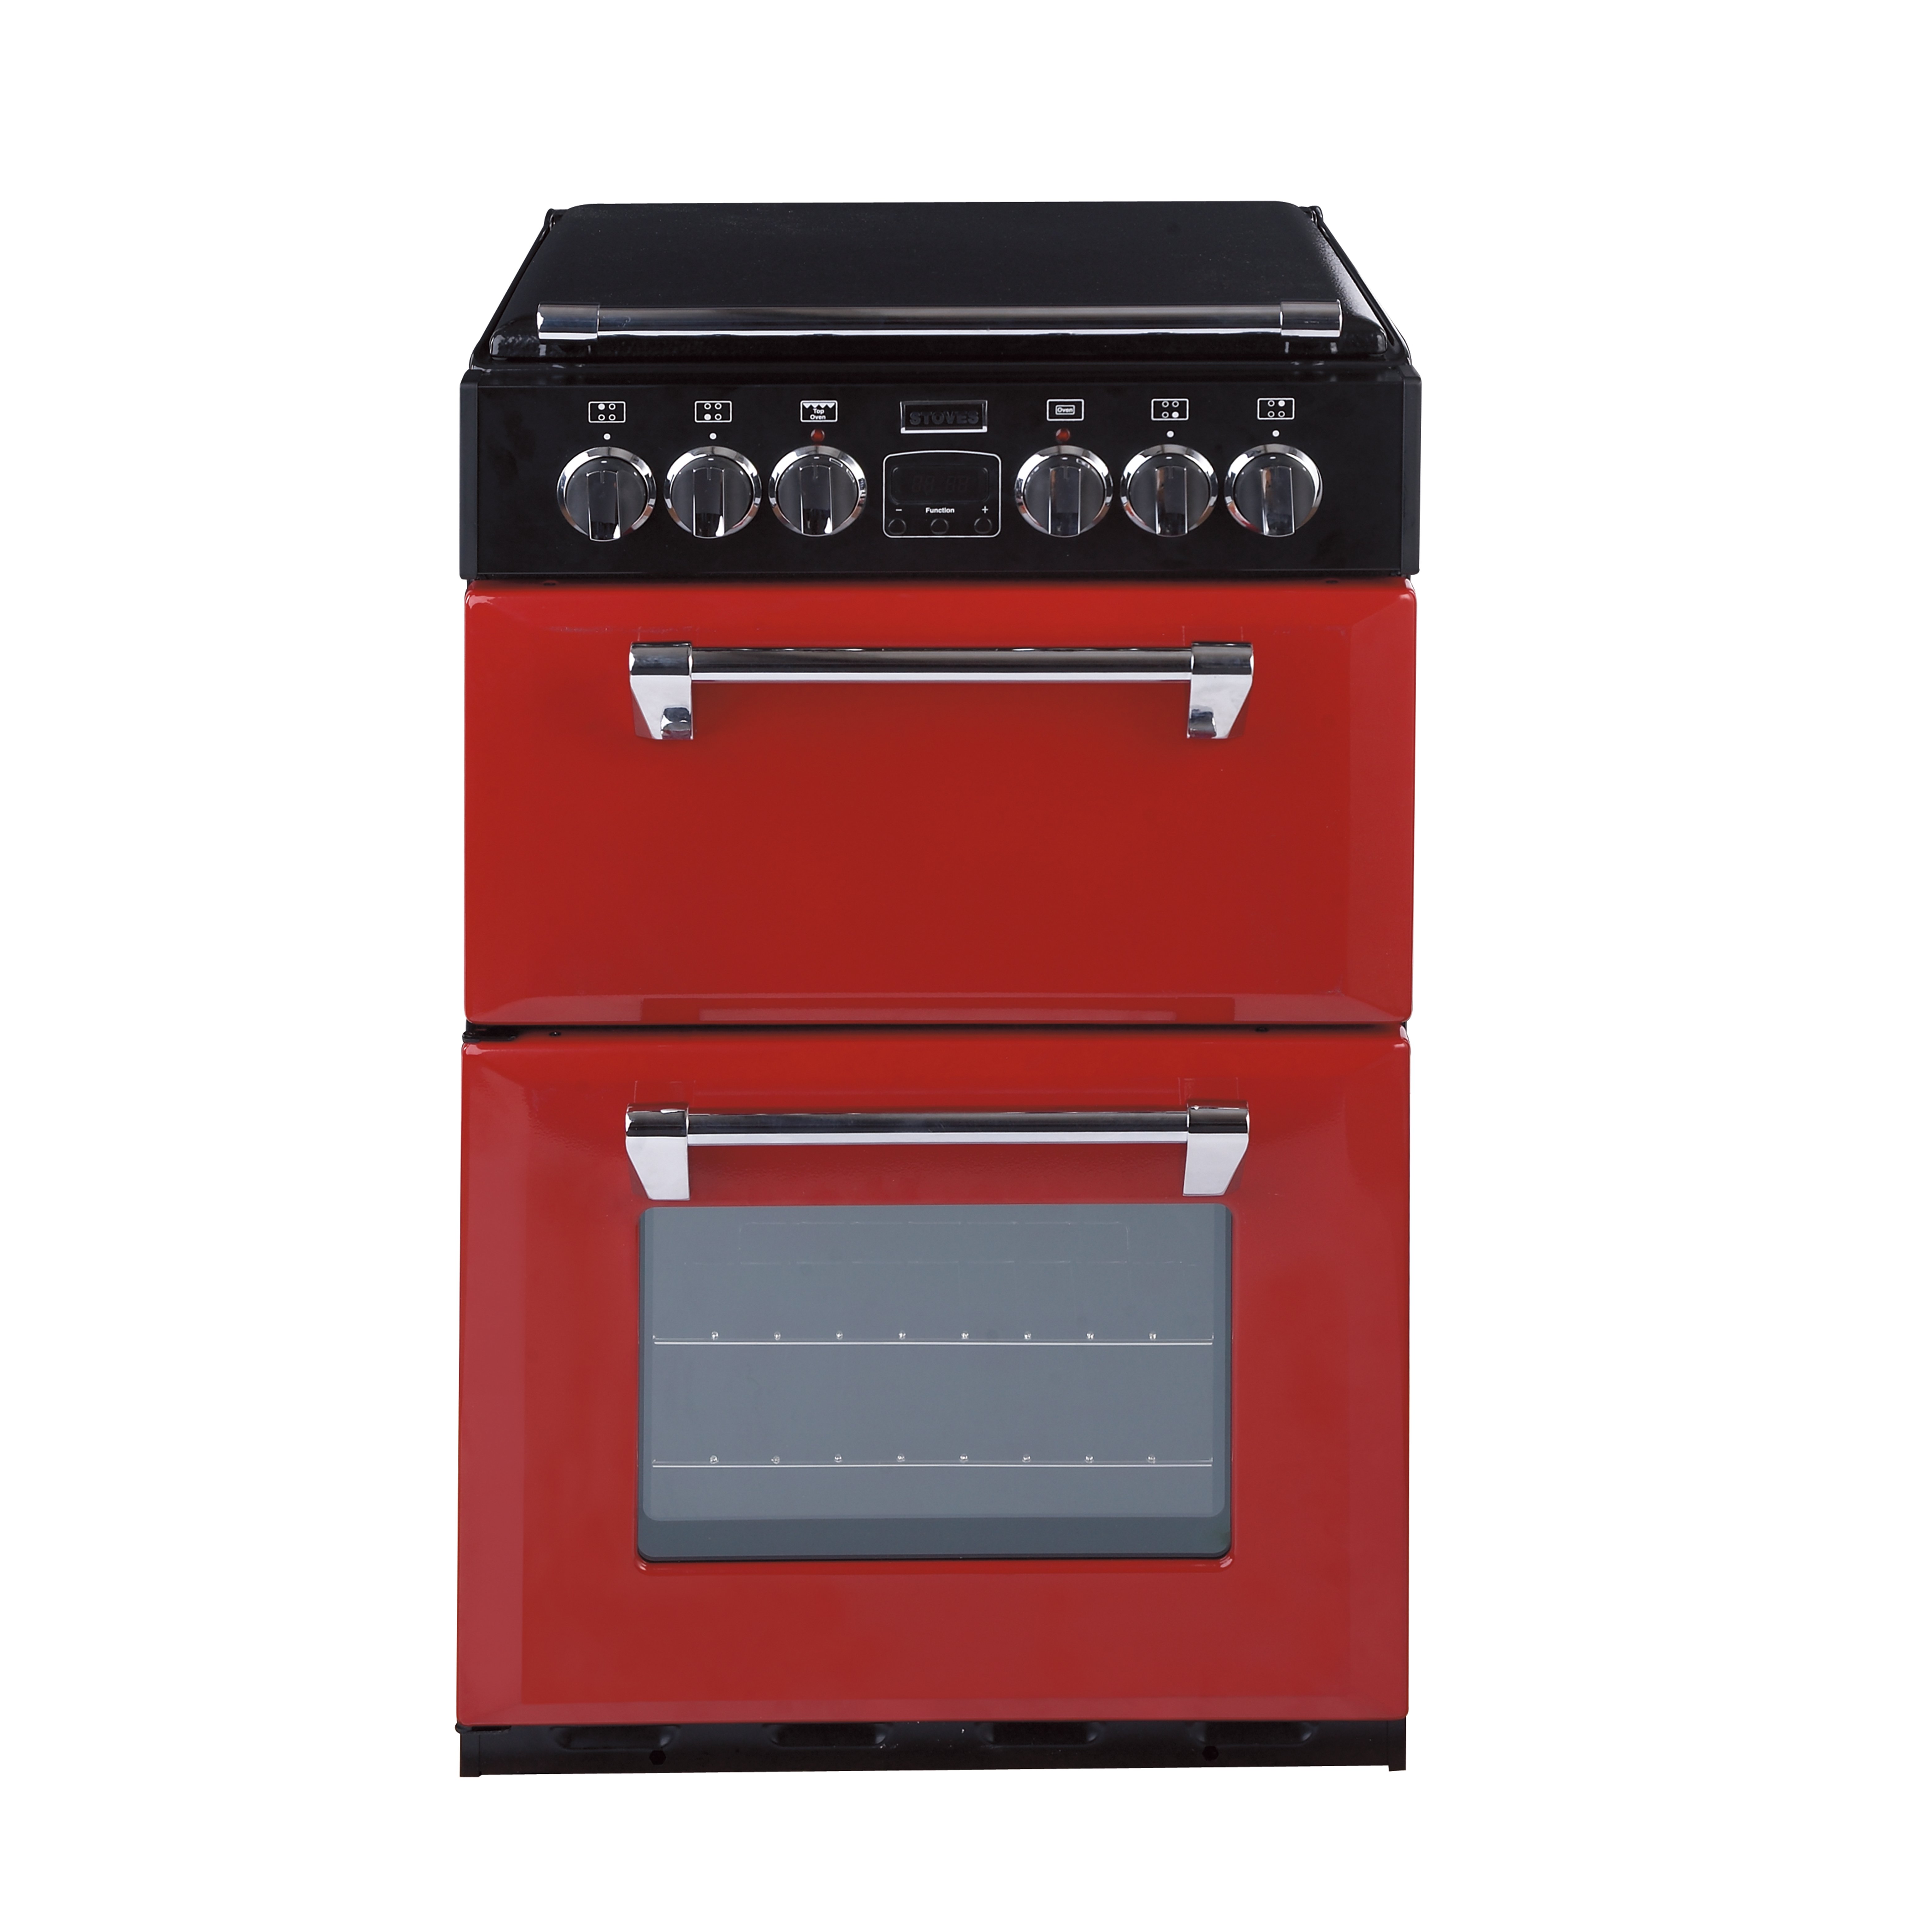 55cm electric double oven offers a programmable timer, defrost and dough proving functions and easy clean enamel. A/A energy rating.